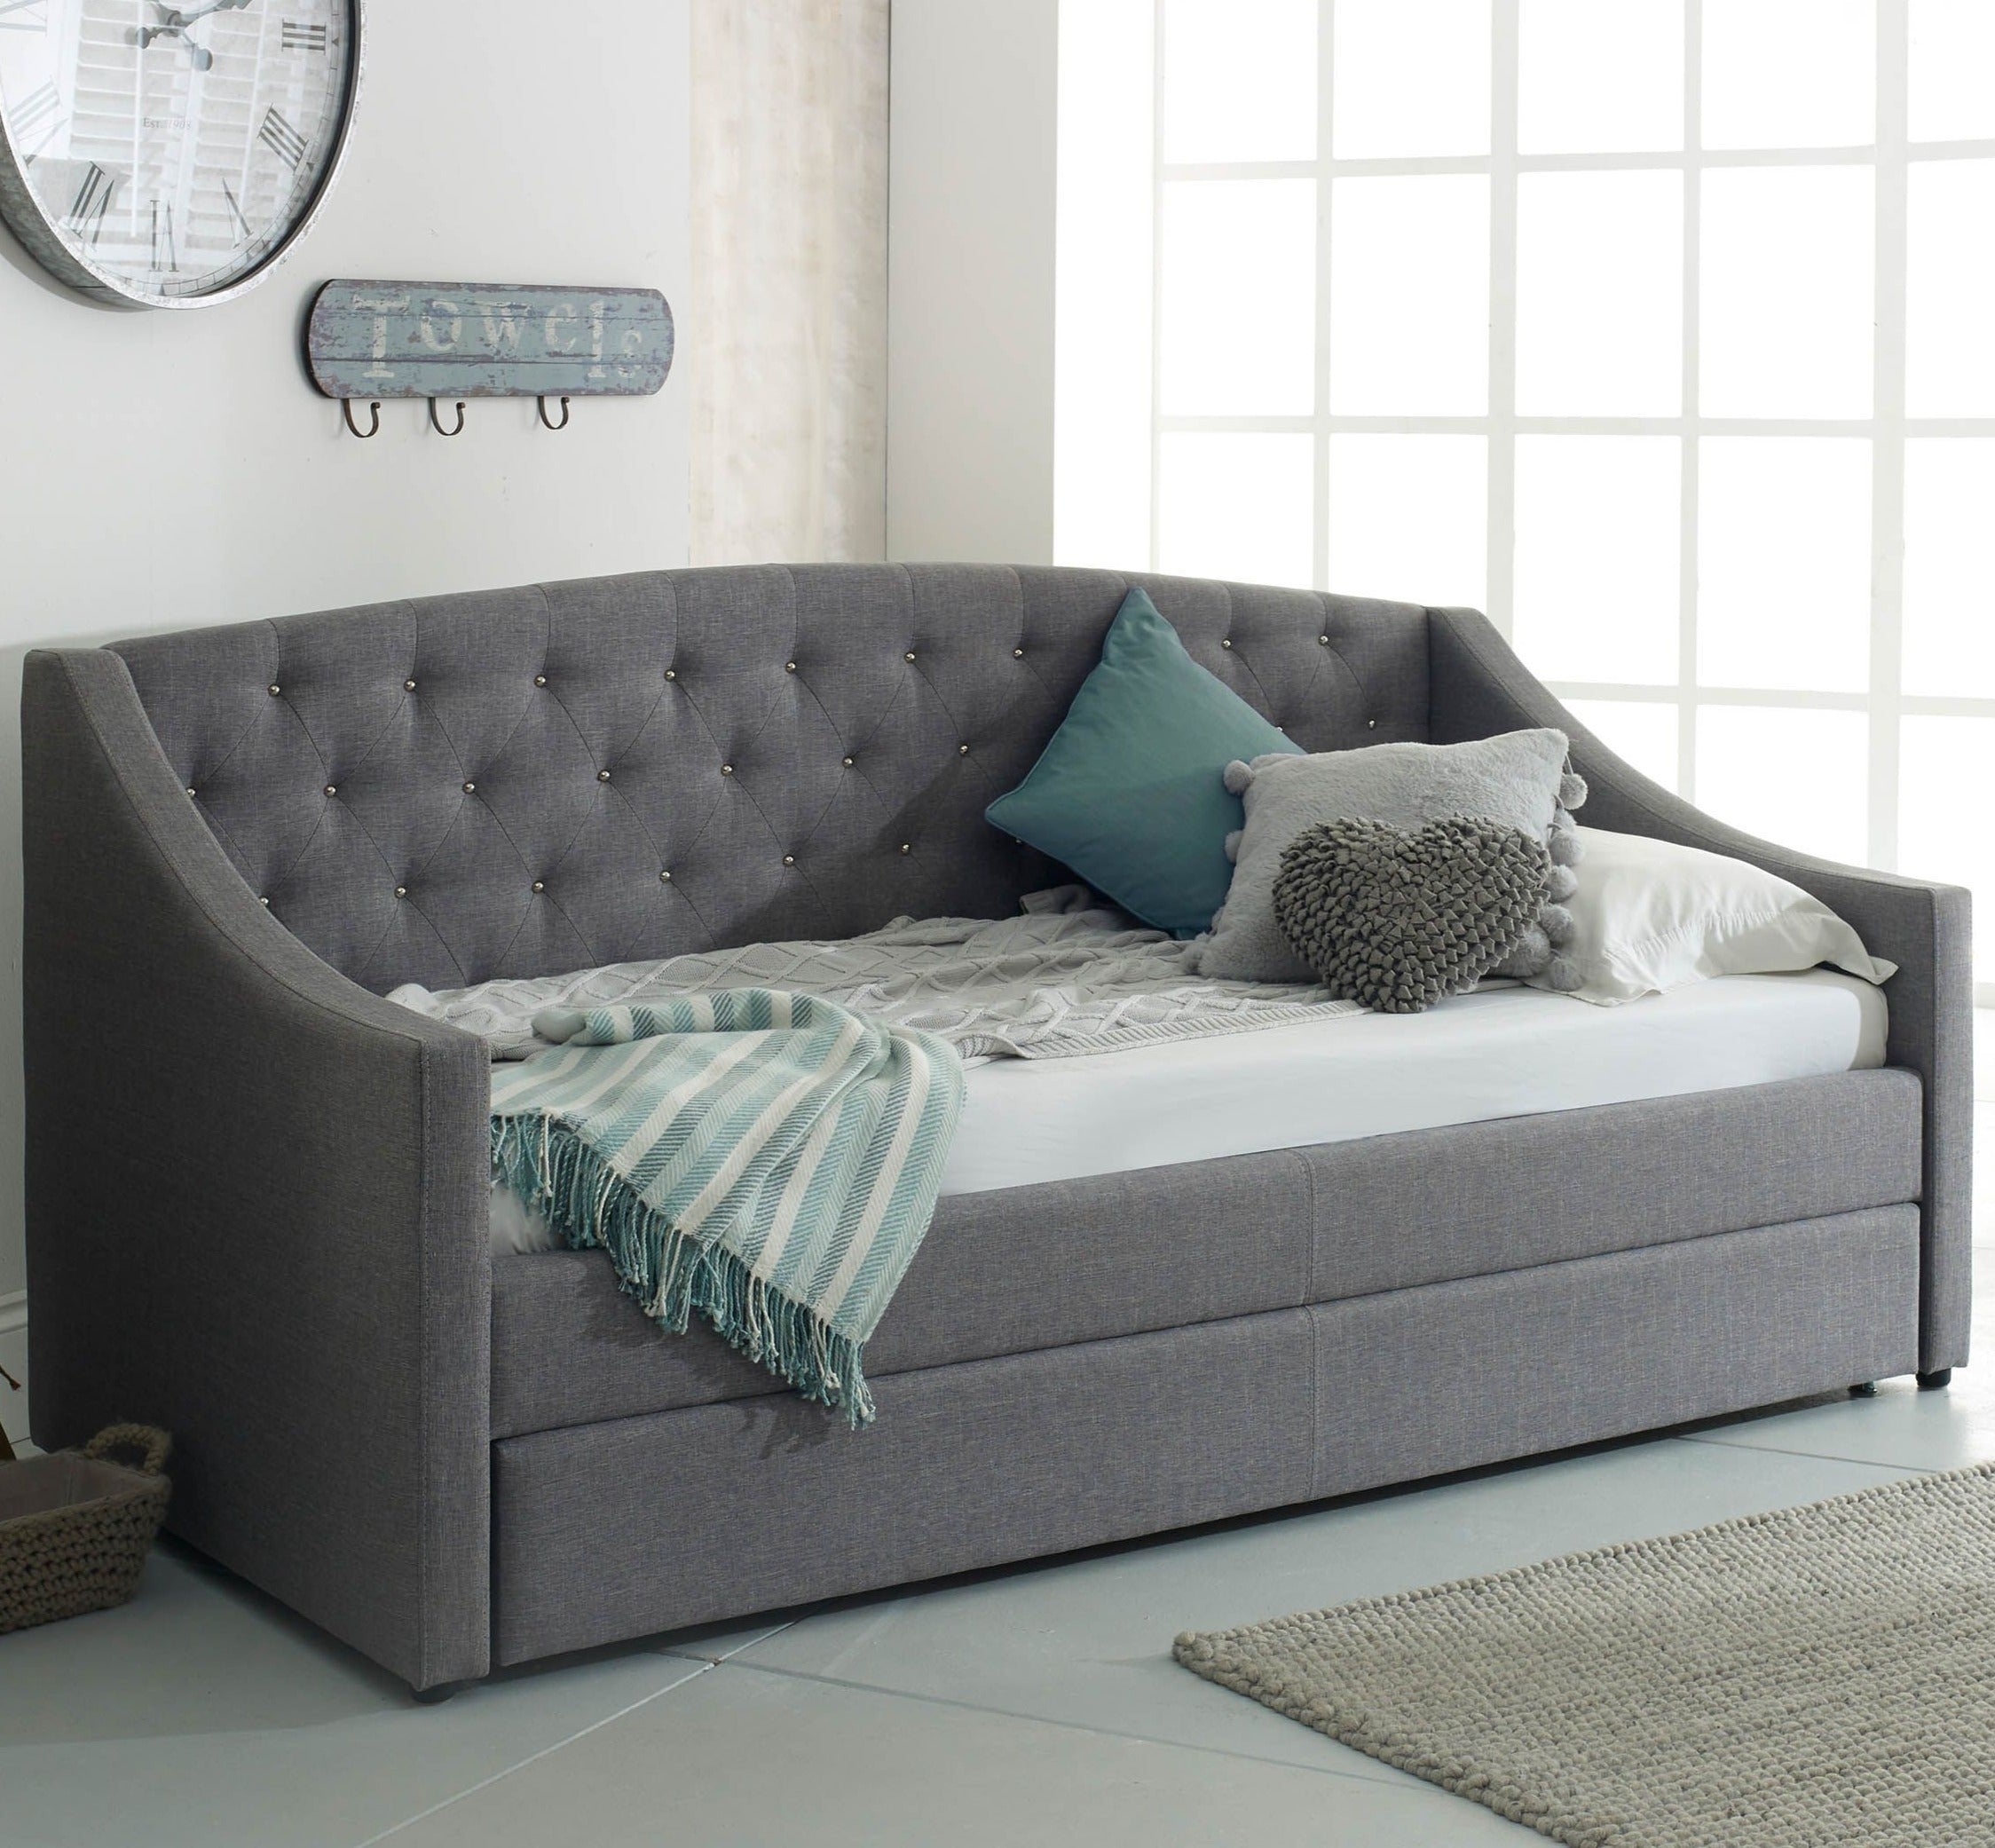 AURORA GREY FABRIC DAYBED WITH TRUNDLE